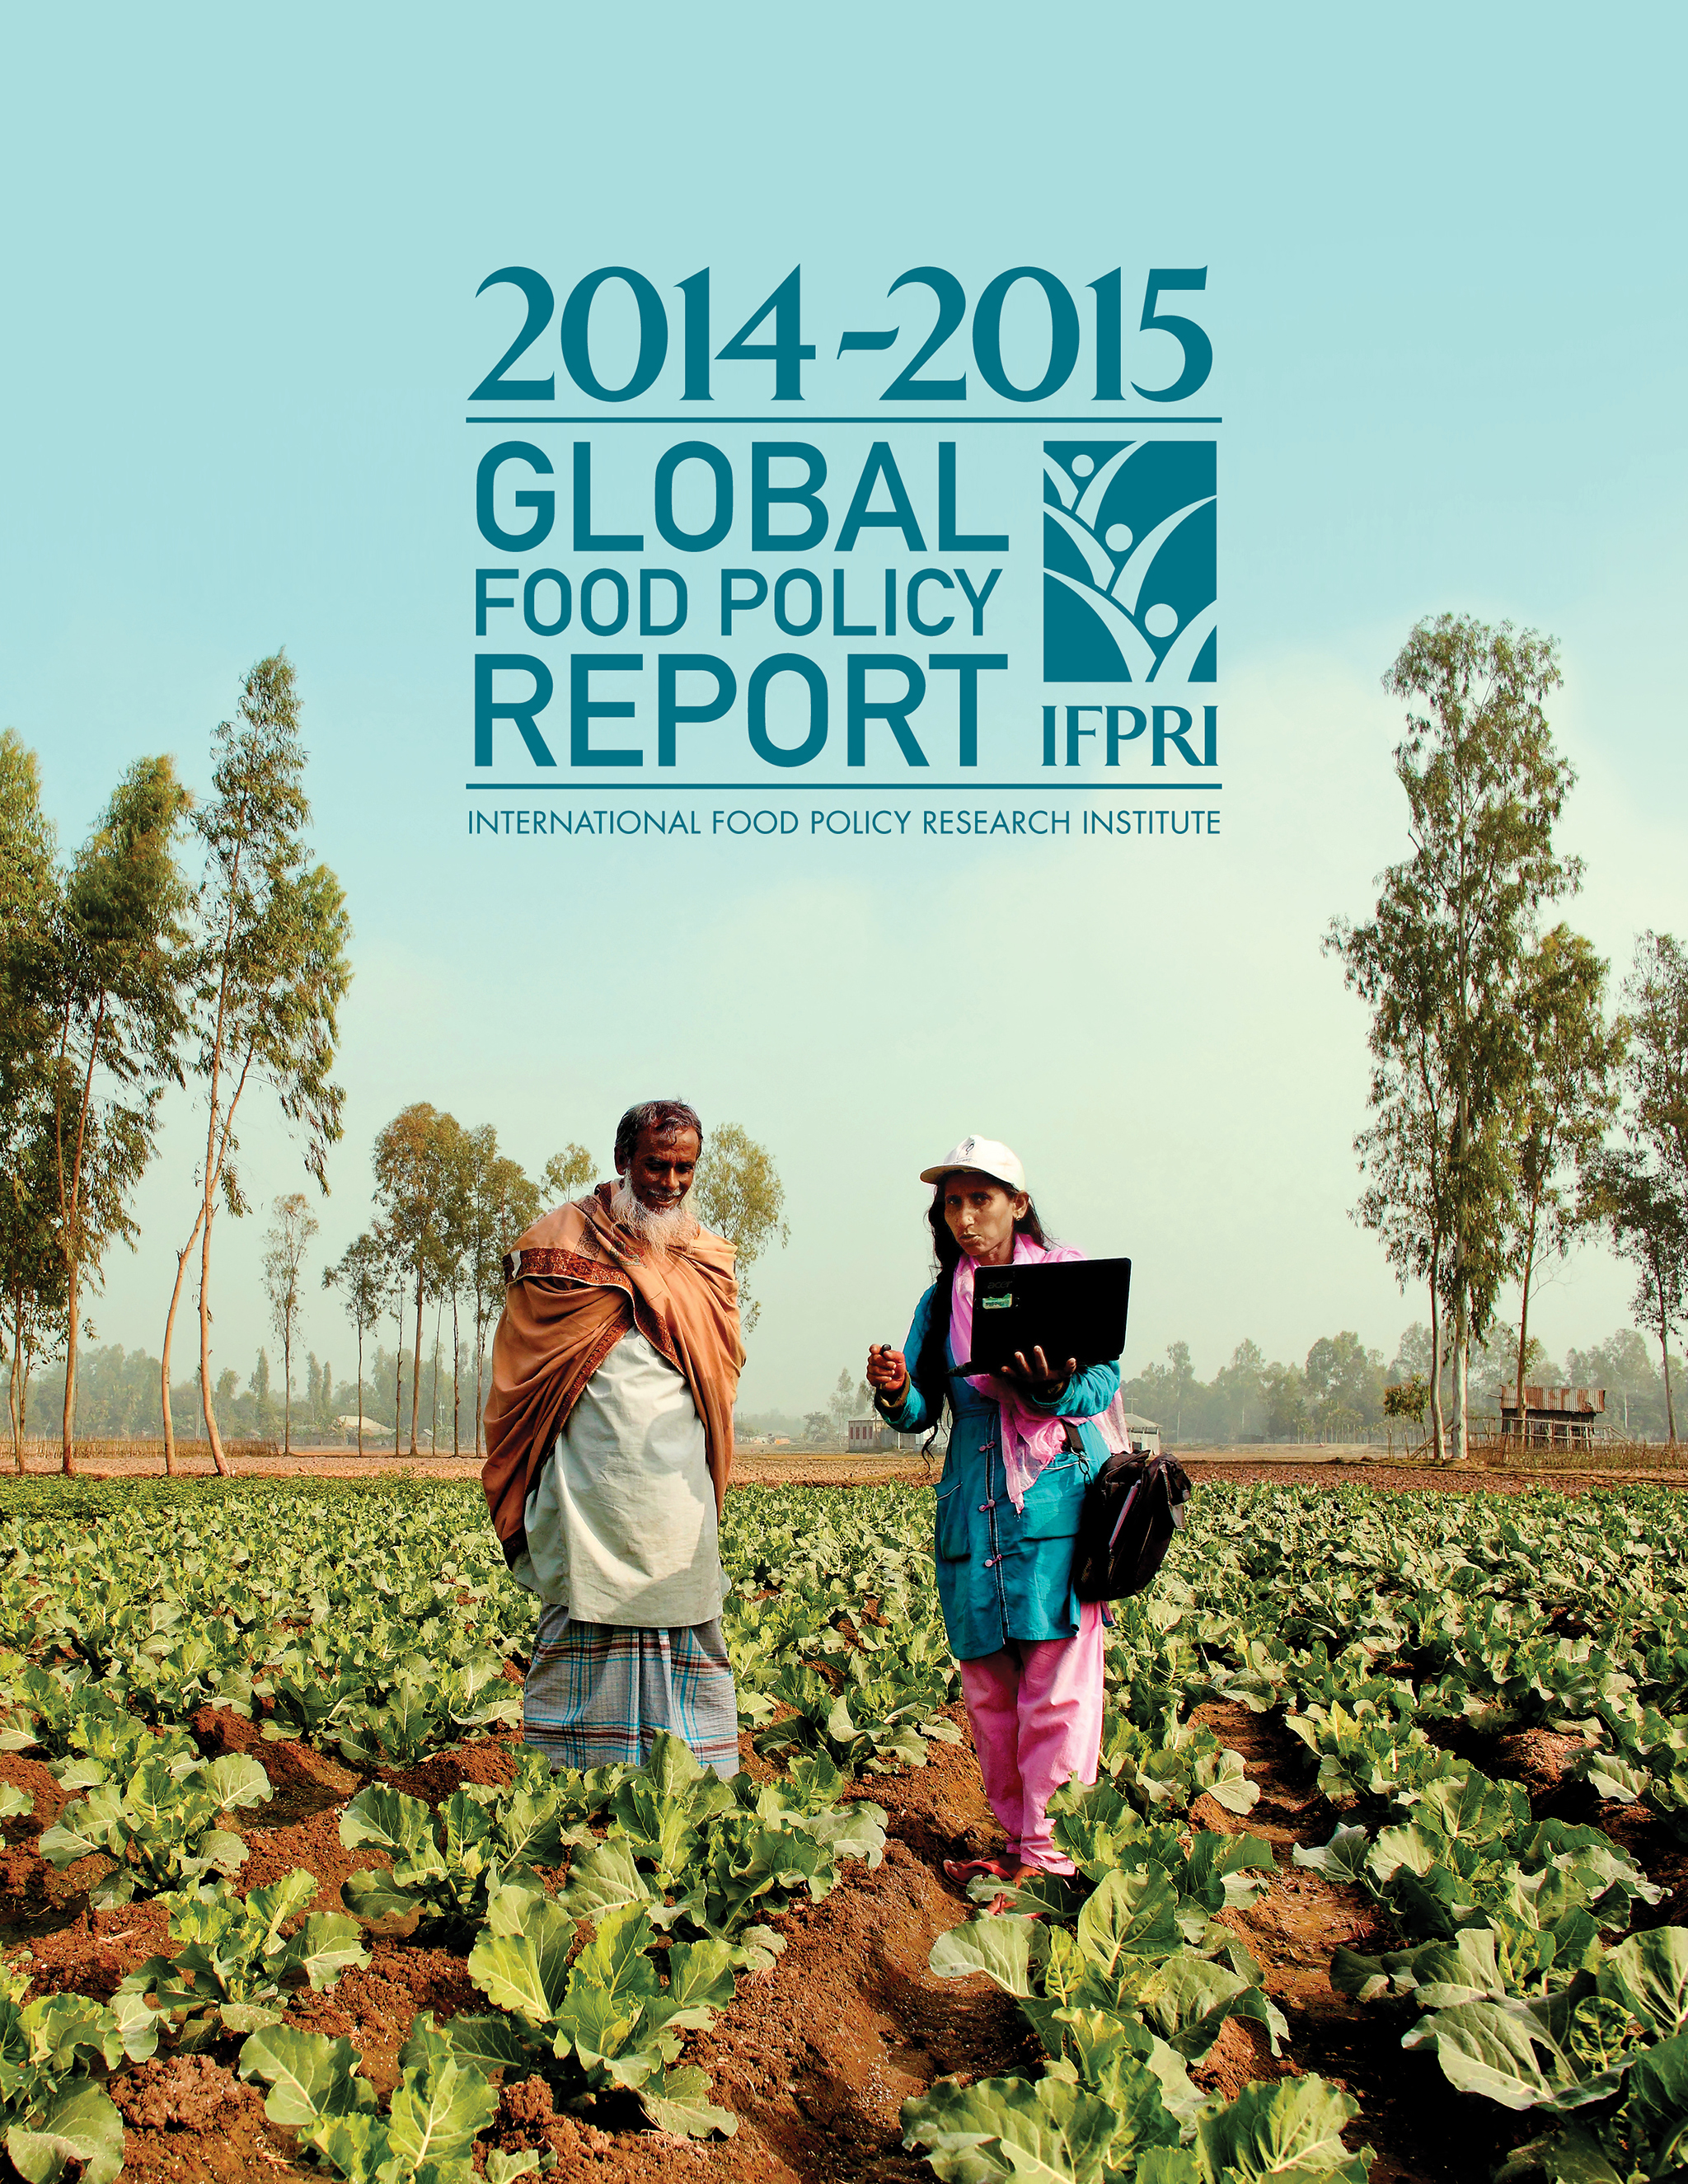 Cover image of 2014-2015 Global Food Policy Report shows man and woman with laptop talking in a planted field